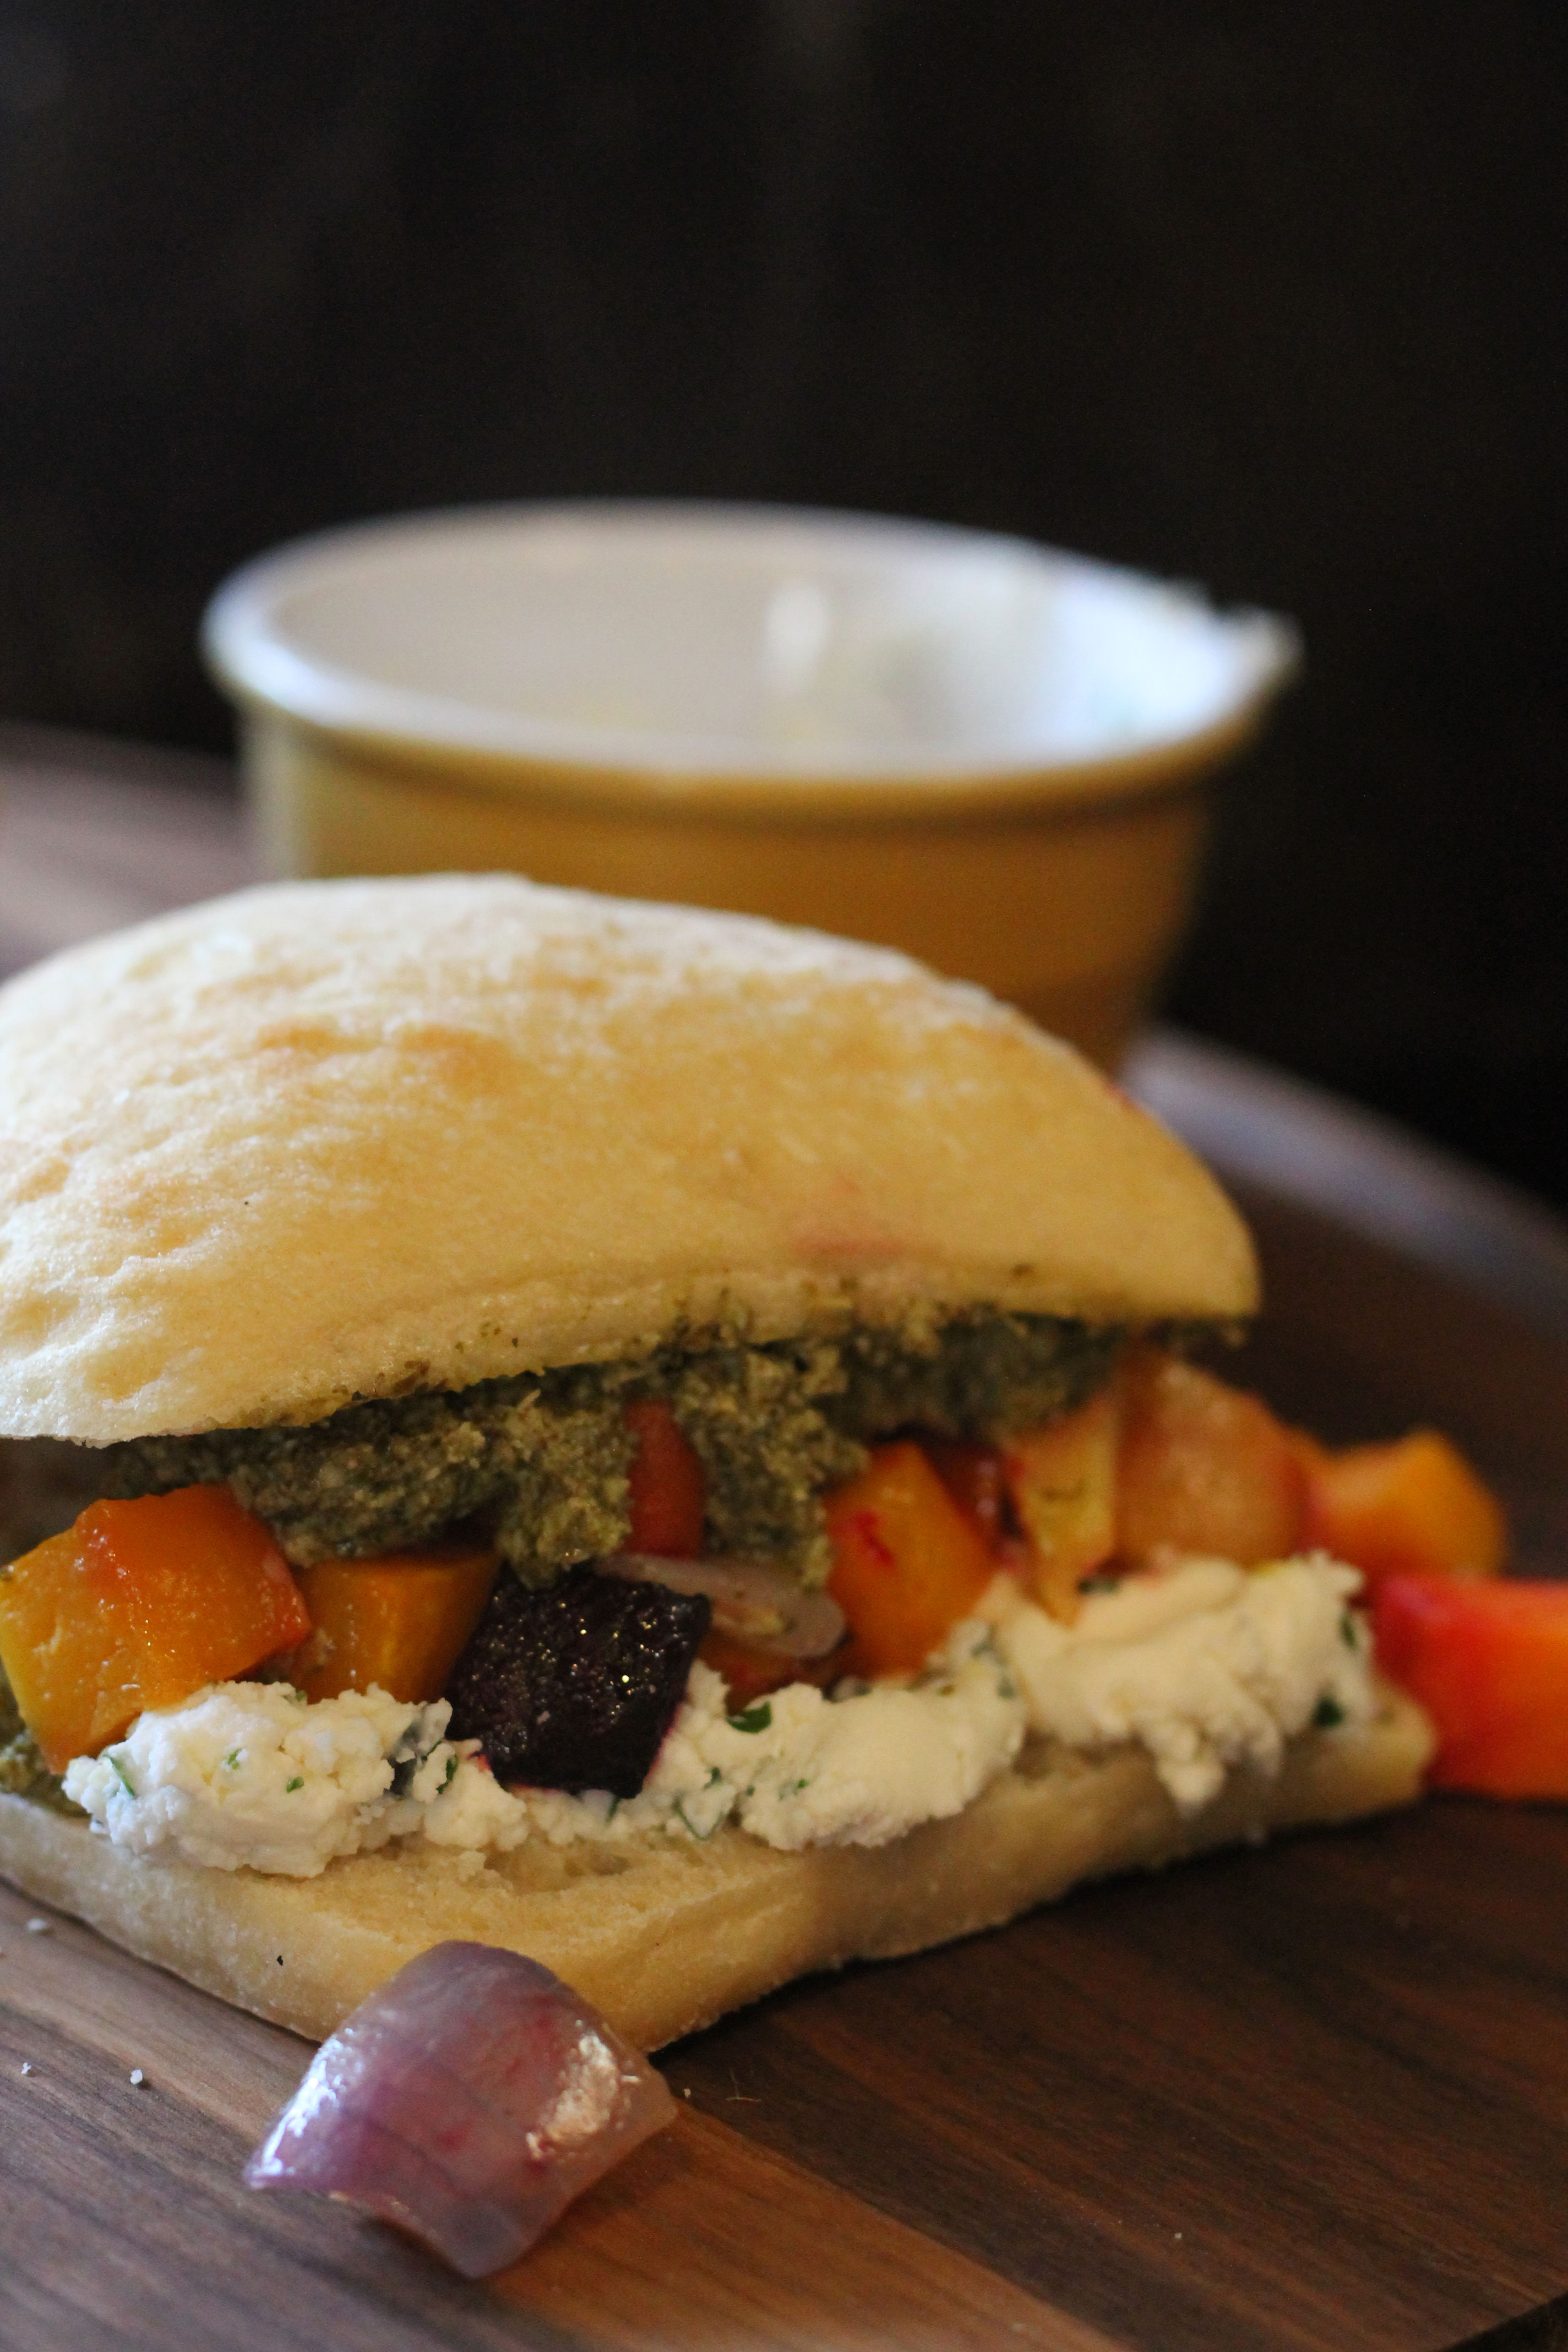 Winter Vegetable Sandwich with Pesto and Whipped Goat Cheese | Hall Nesting